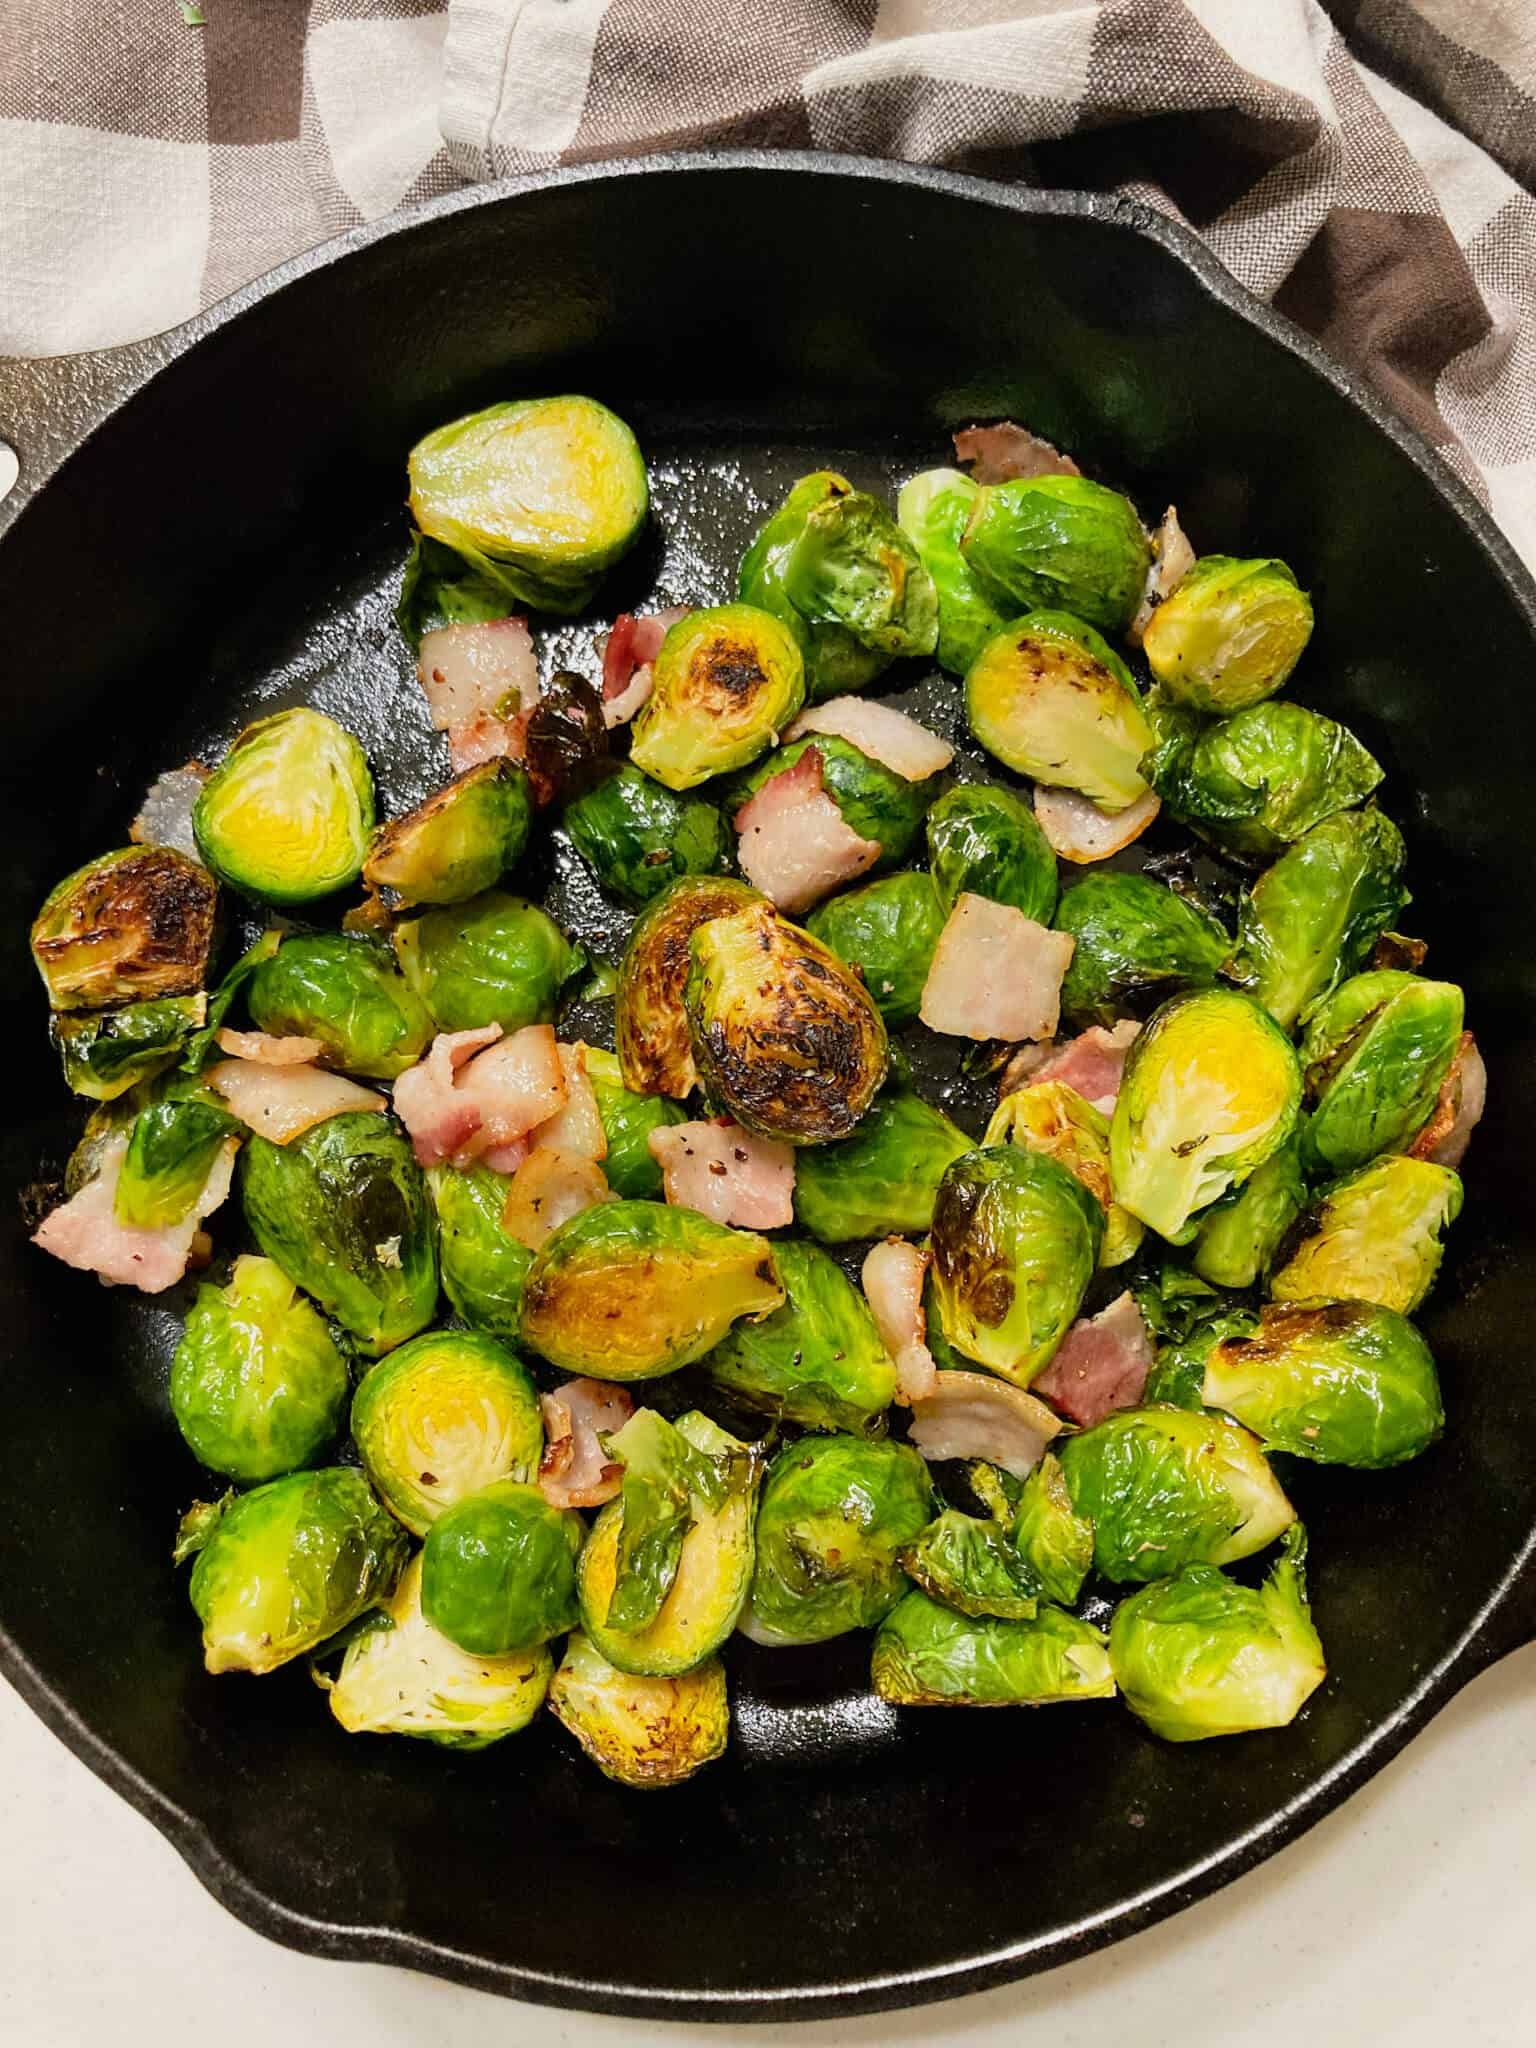 Roasted Brussles sprouts with bacon in a cast iron skillet and buffalo check towel